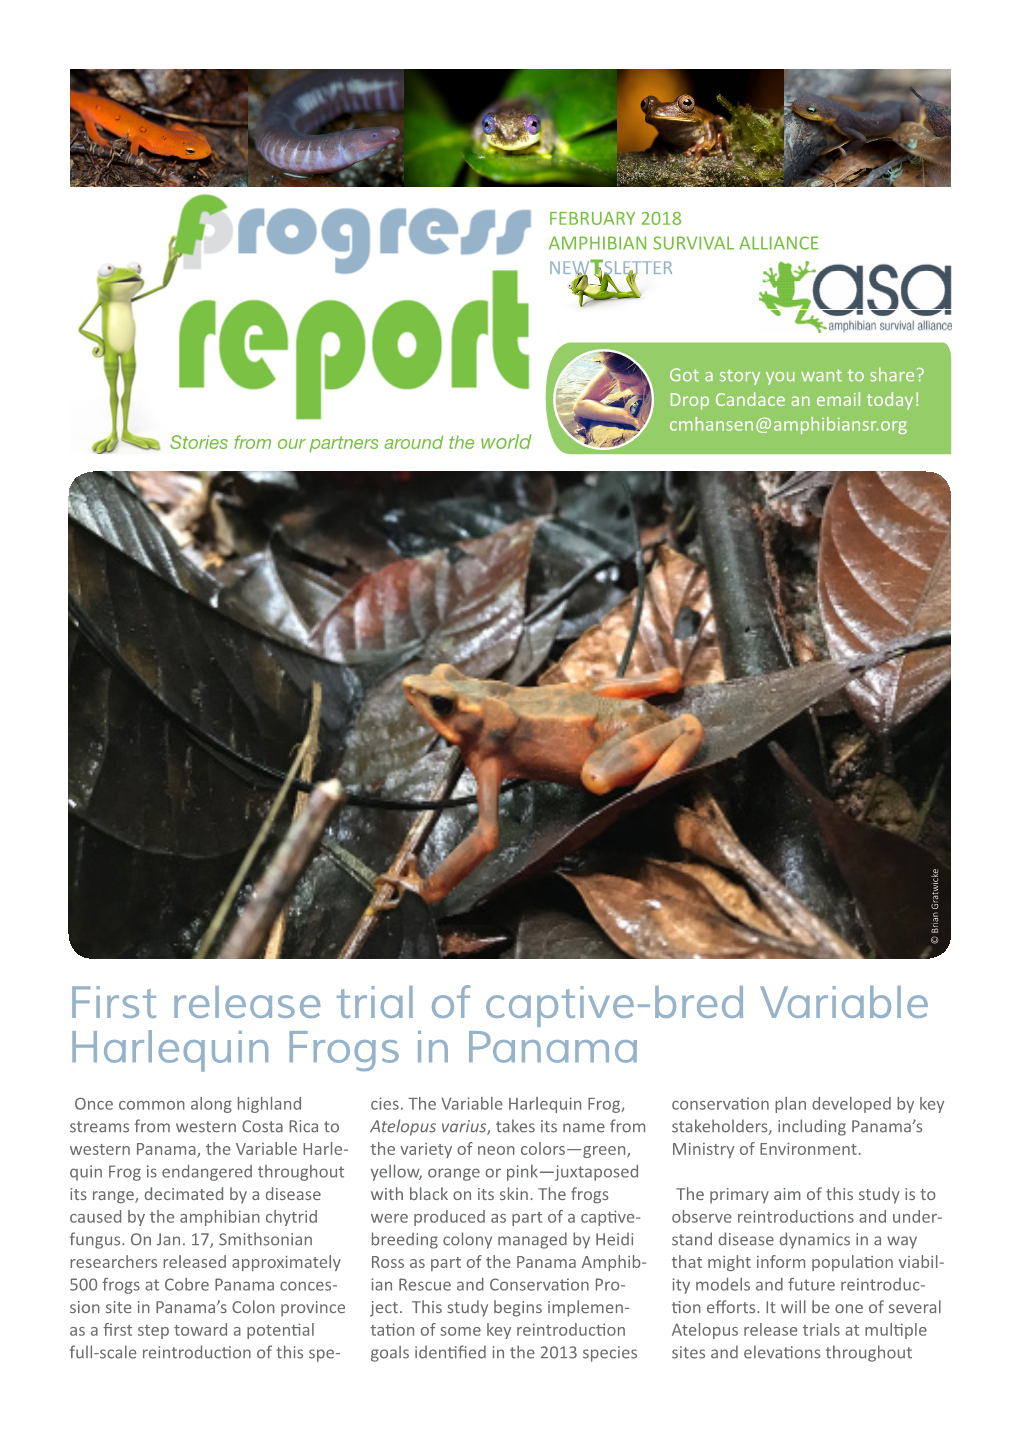 First Release Trial of Captive-Bred Variable Harlequin Frogs in Panama